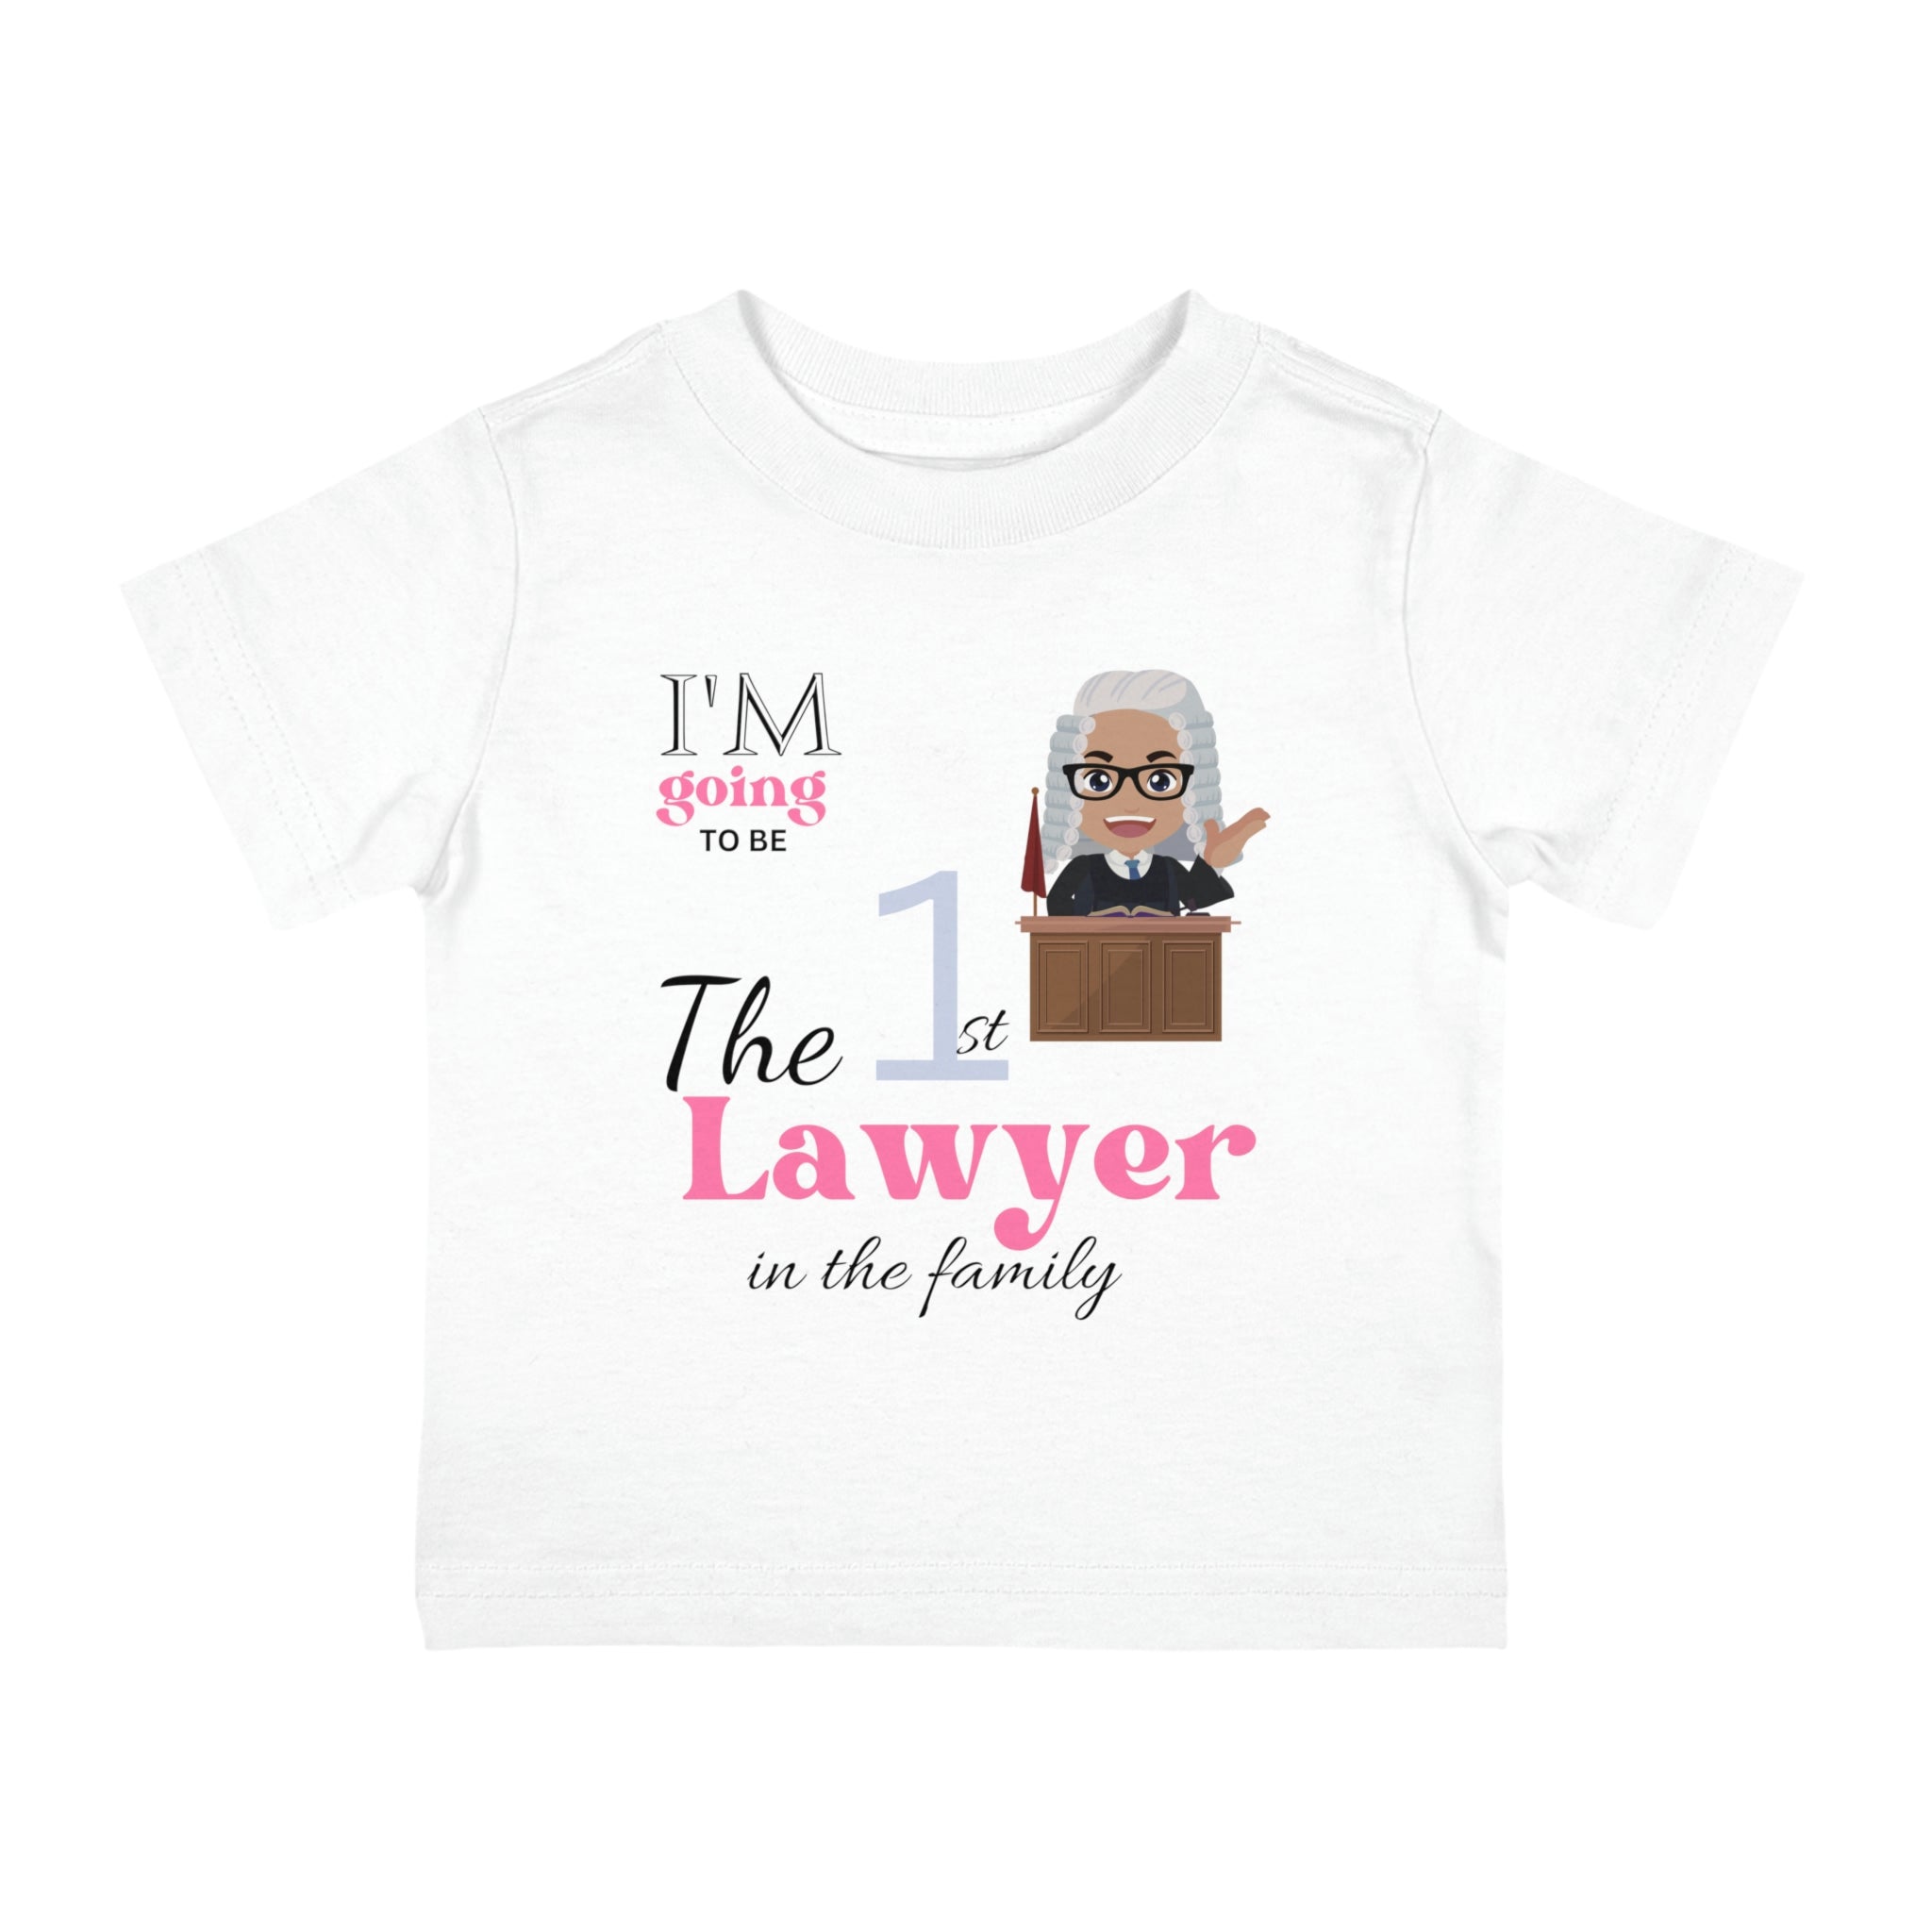 The 1st Lawyer Infant Shirt, Baby Tee, Infant Tee